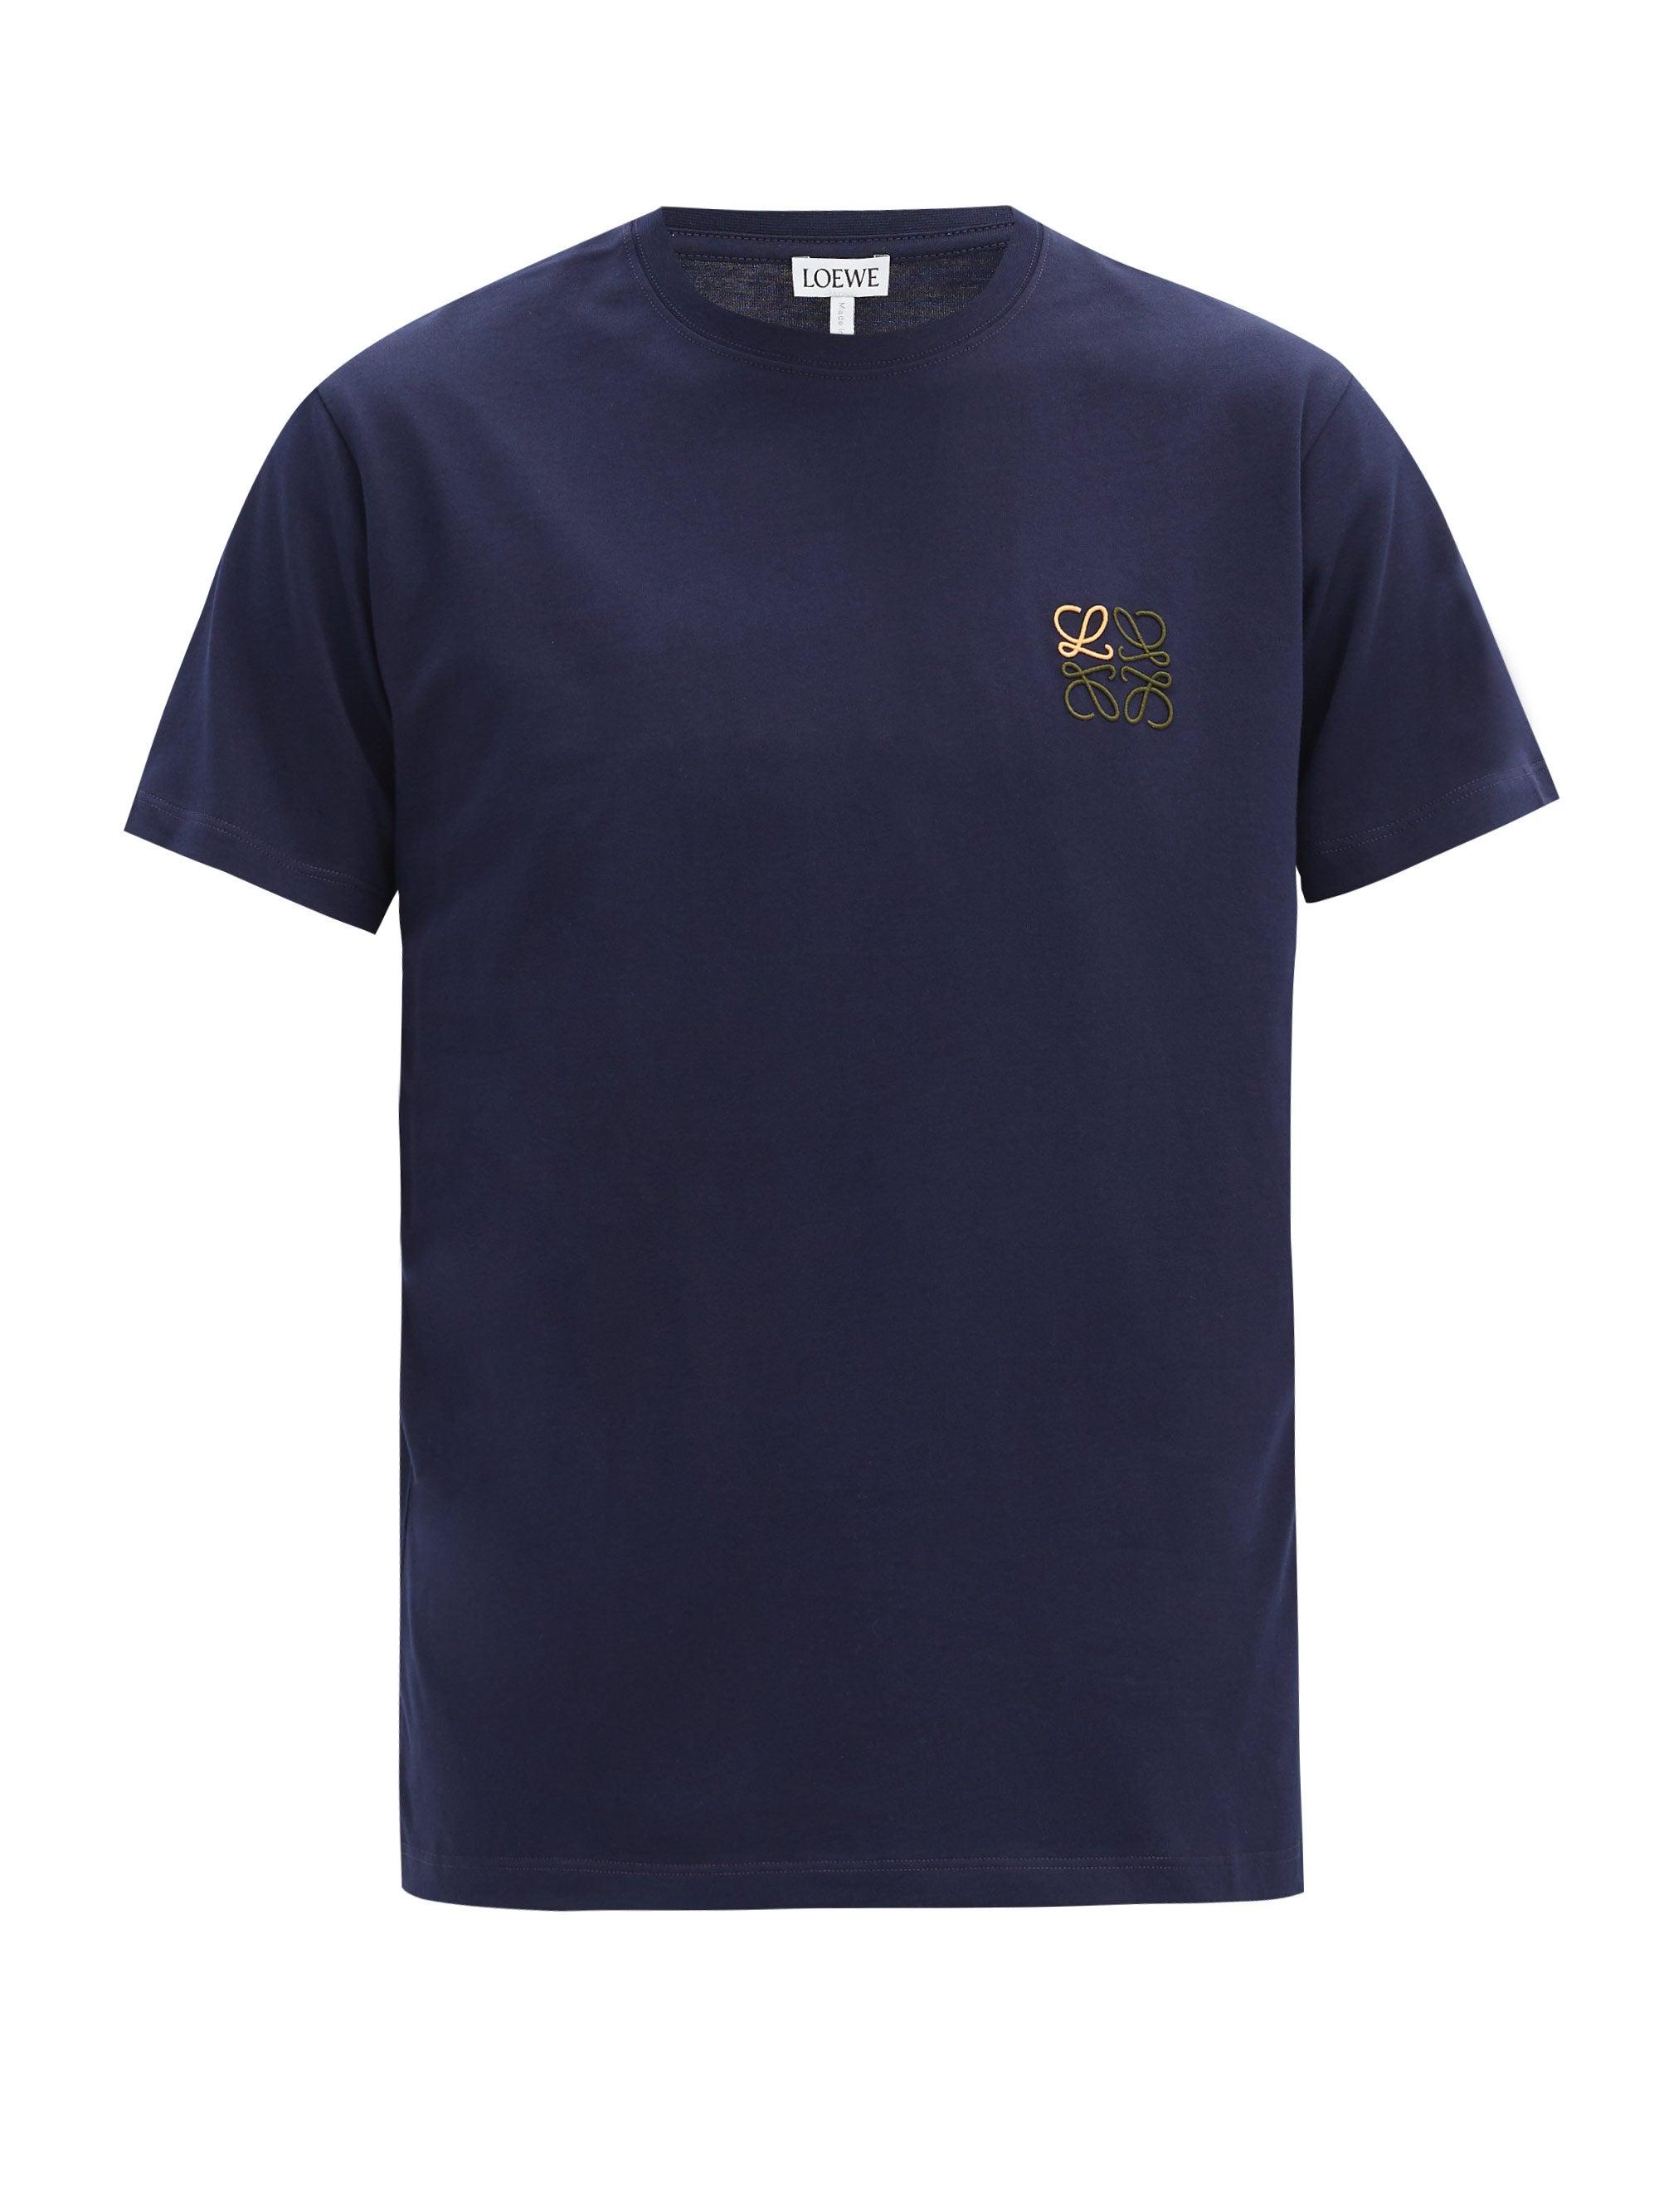 Loewe Anagram-embroidered Cotton T-shirt in Navy (Blue) for Men - Lyst